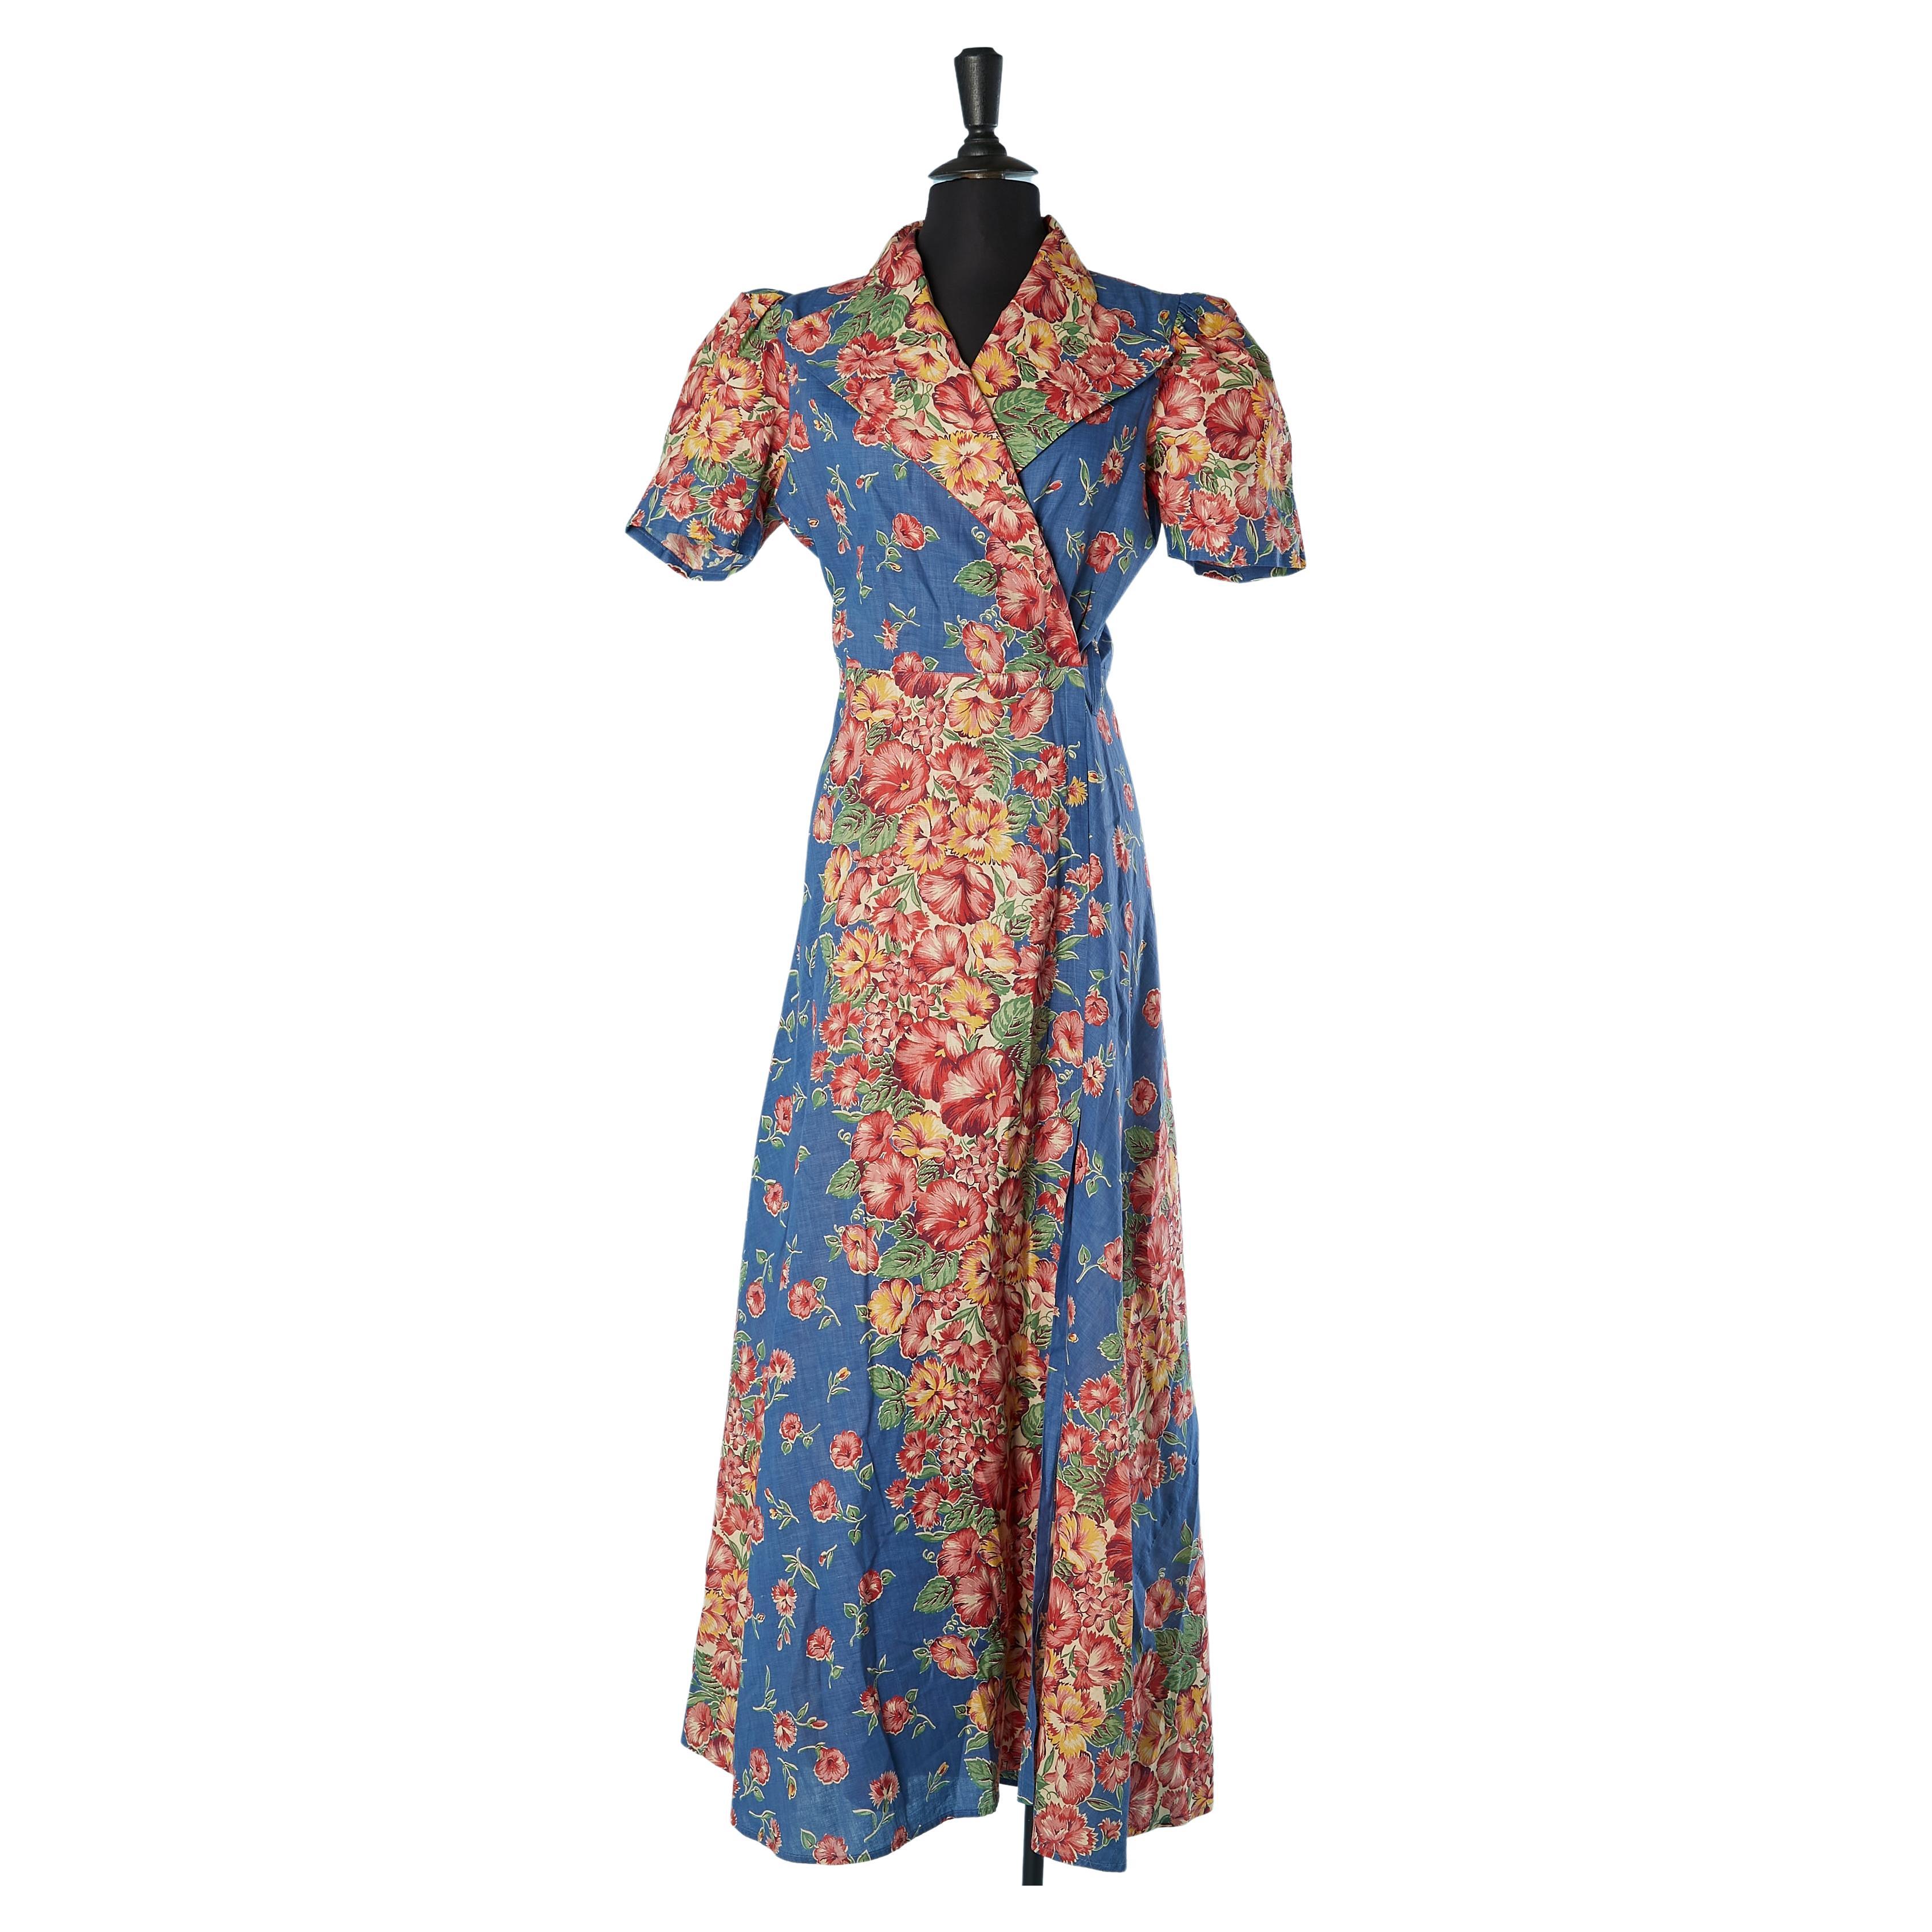 Printed cotton hostess dress wrap in the front Circa 1940's 